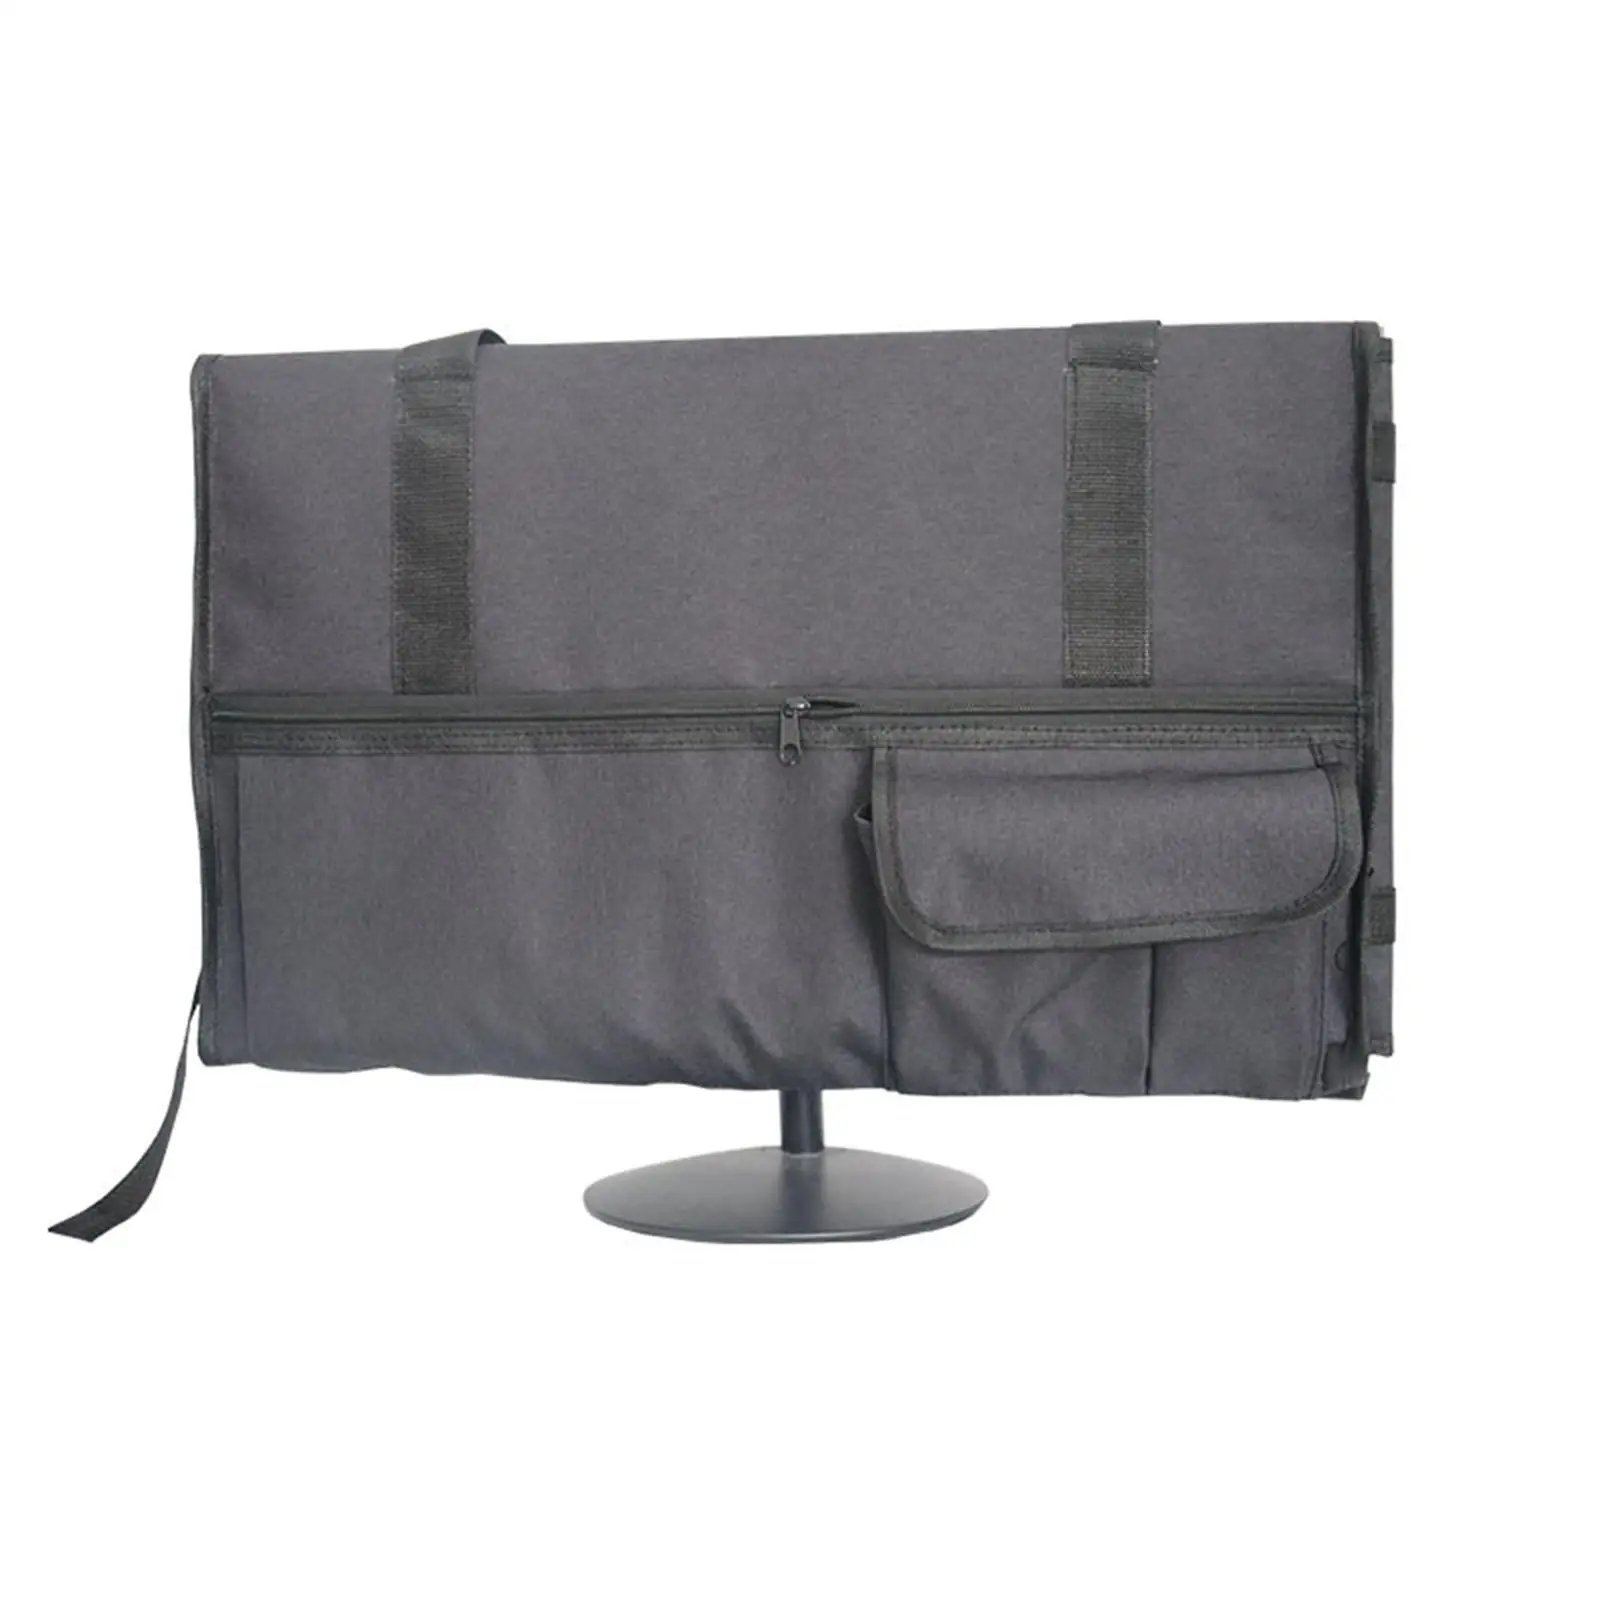 Monitor Carrying Case Padded Laptop Carrying Bag Computer Screen Case Protective Case for Travel